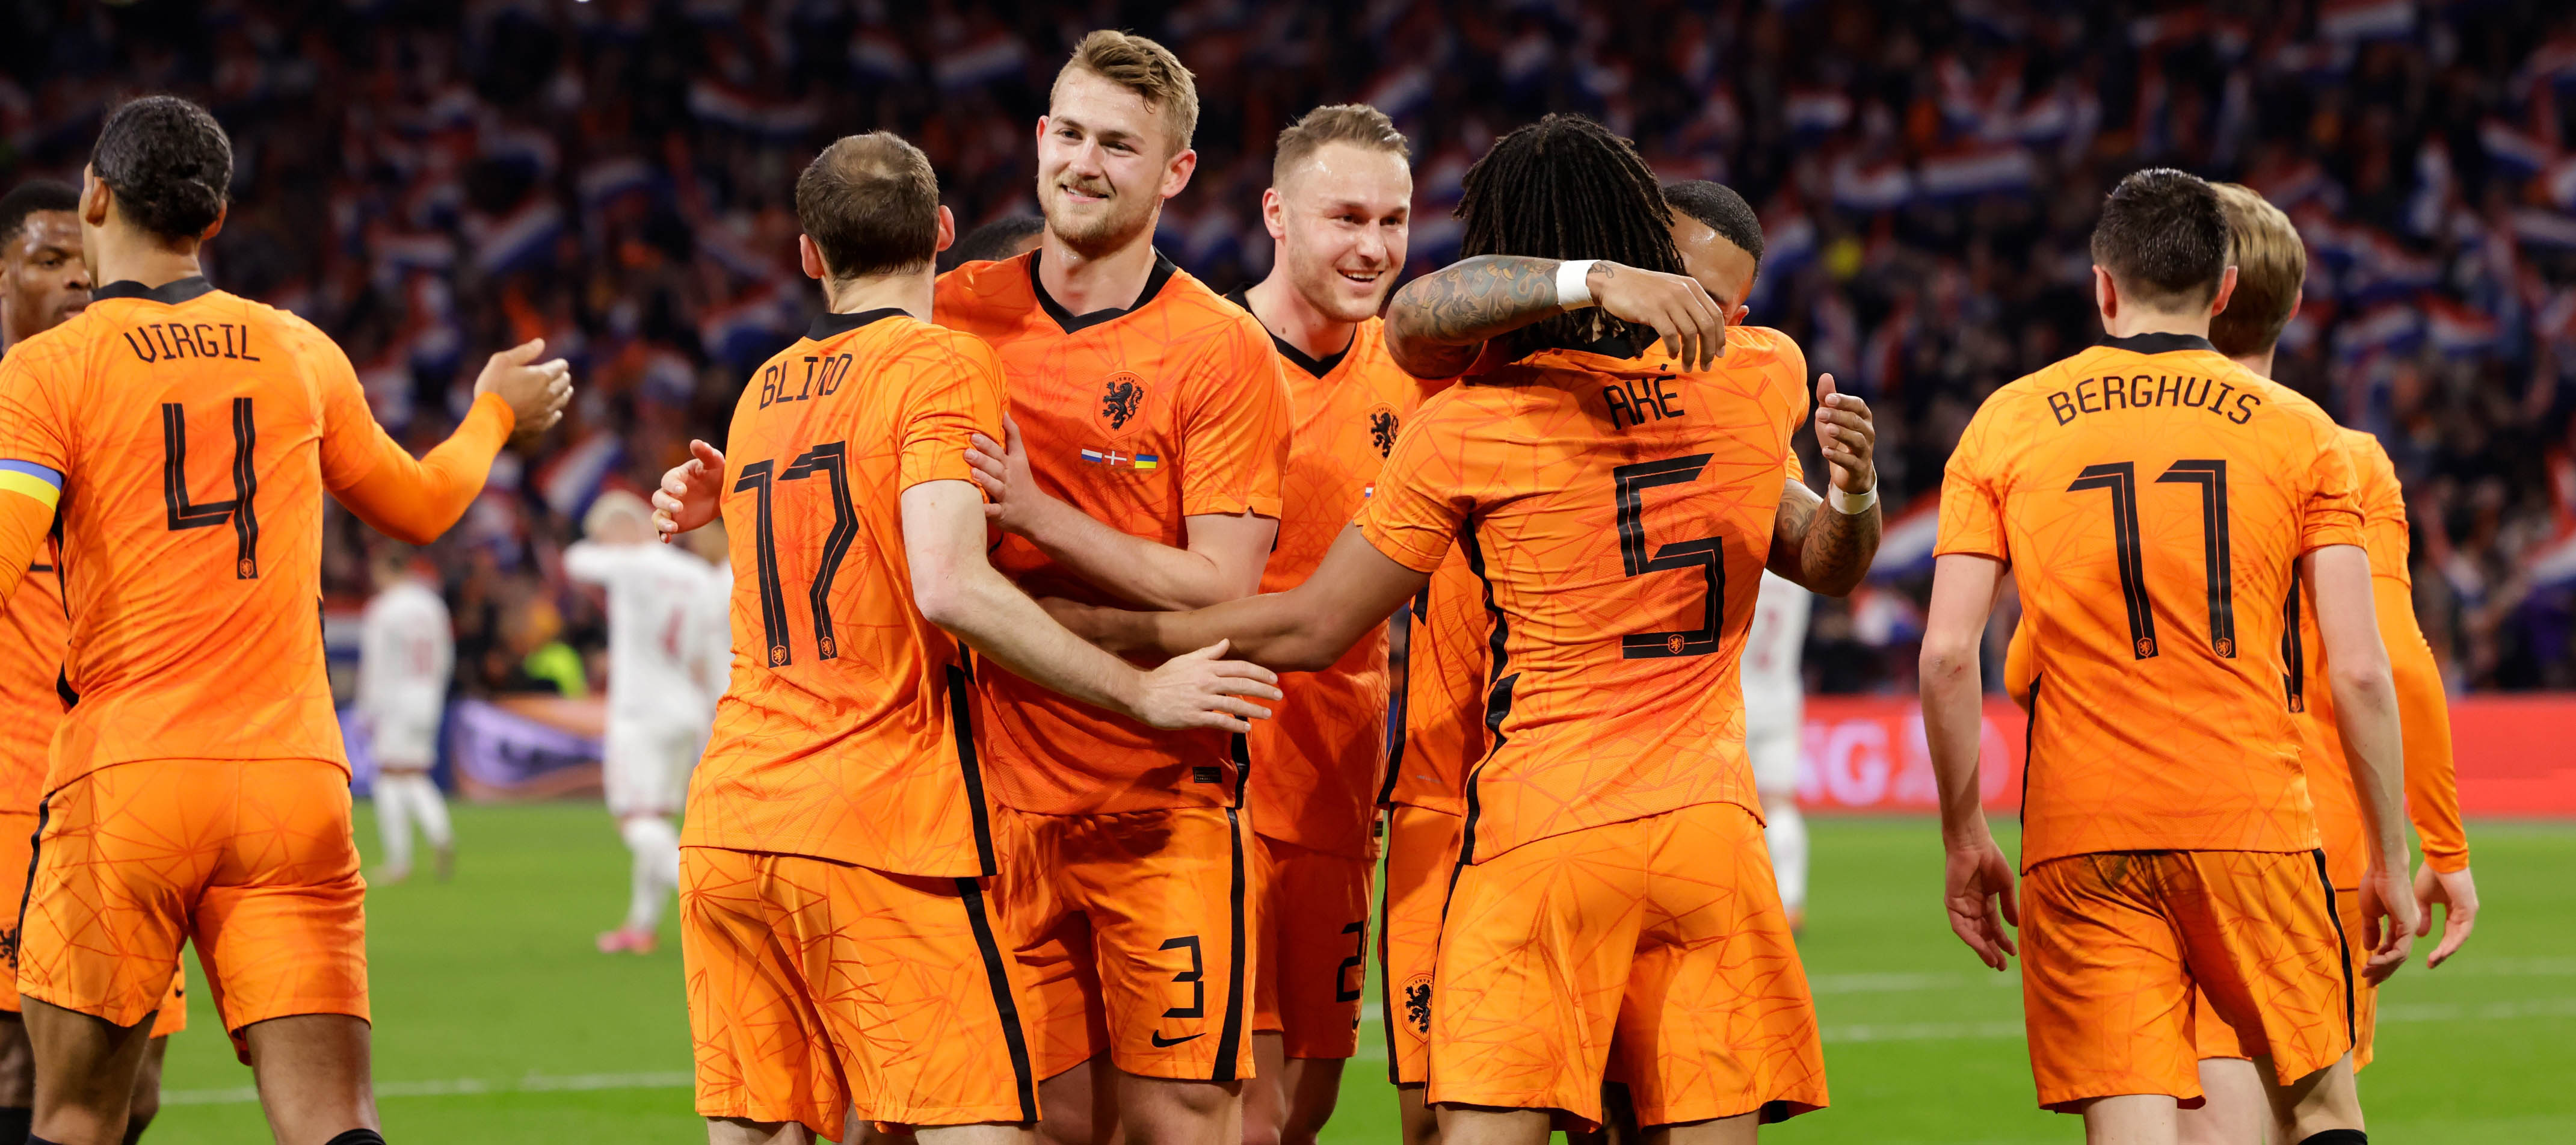 Netherlands Betting Odds to Win the FIFA World Cup and Will They Move to Round of 16